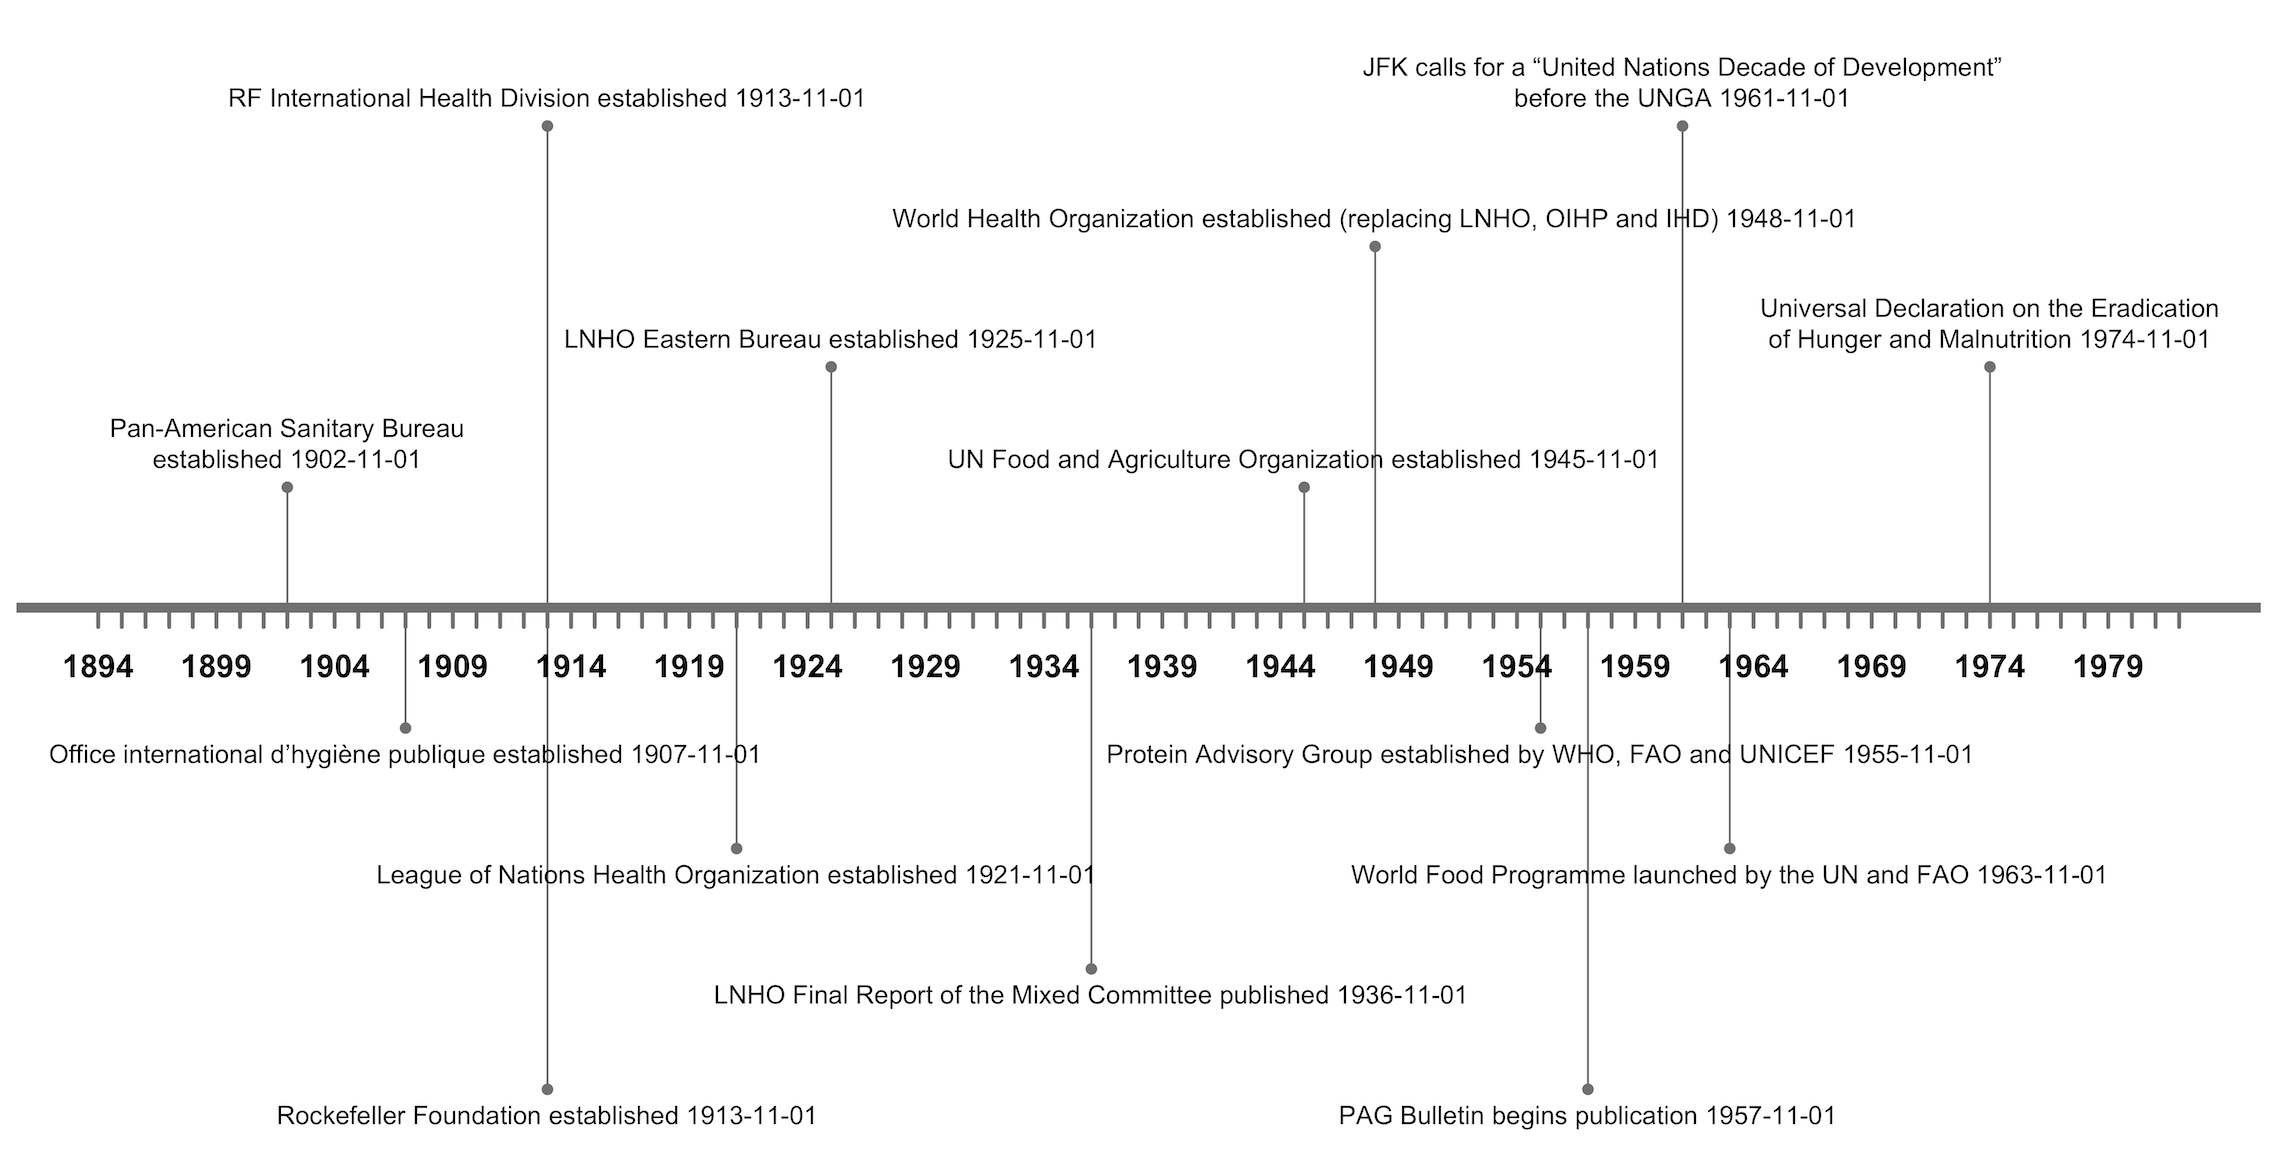 igure 5: Timeline of important events in the history of international co-operation around nutrition and aid of relevance to the history of protein